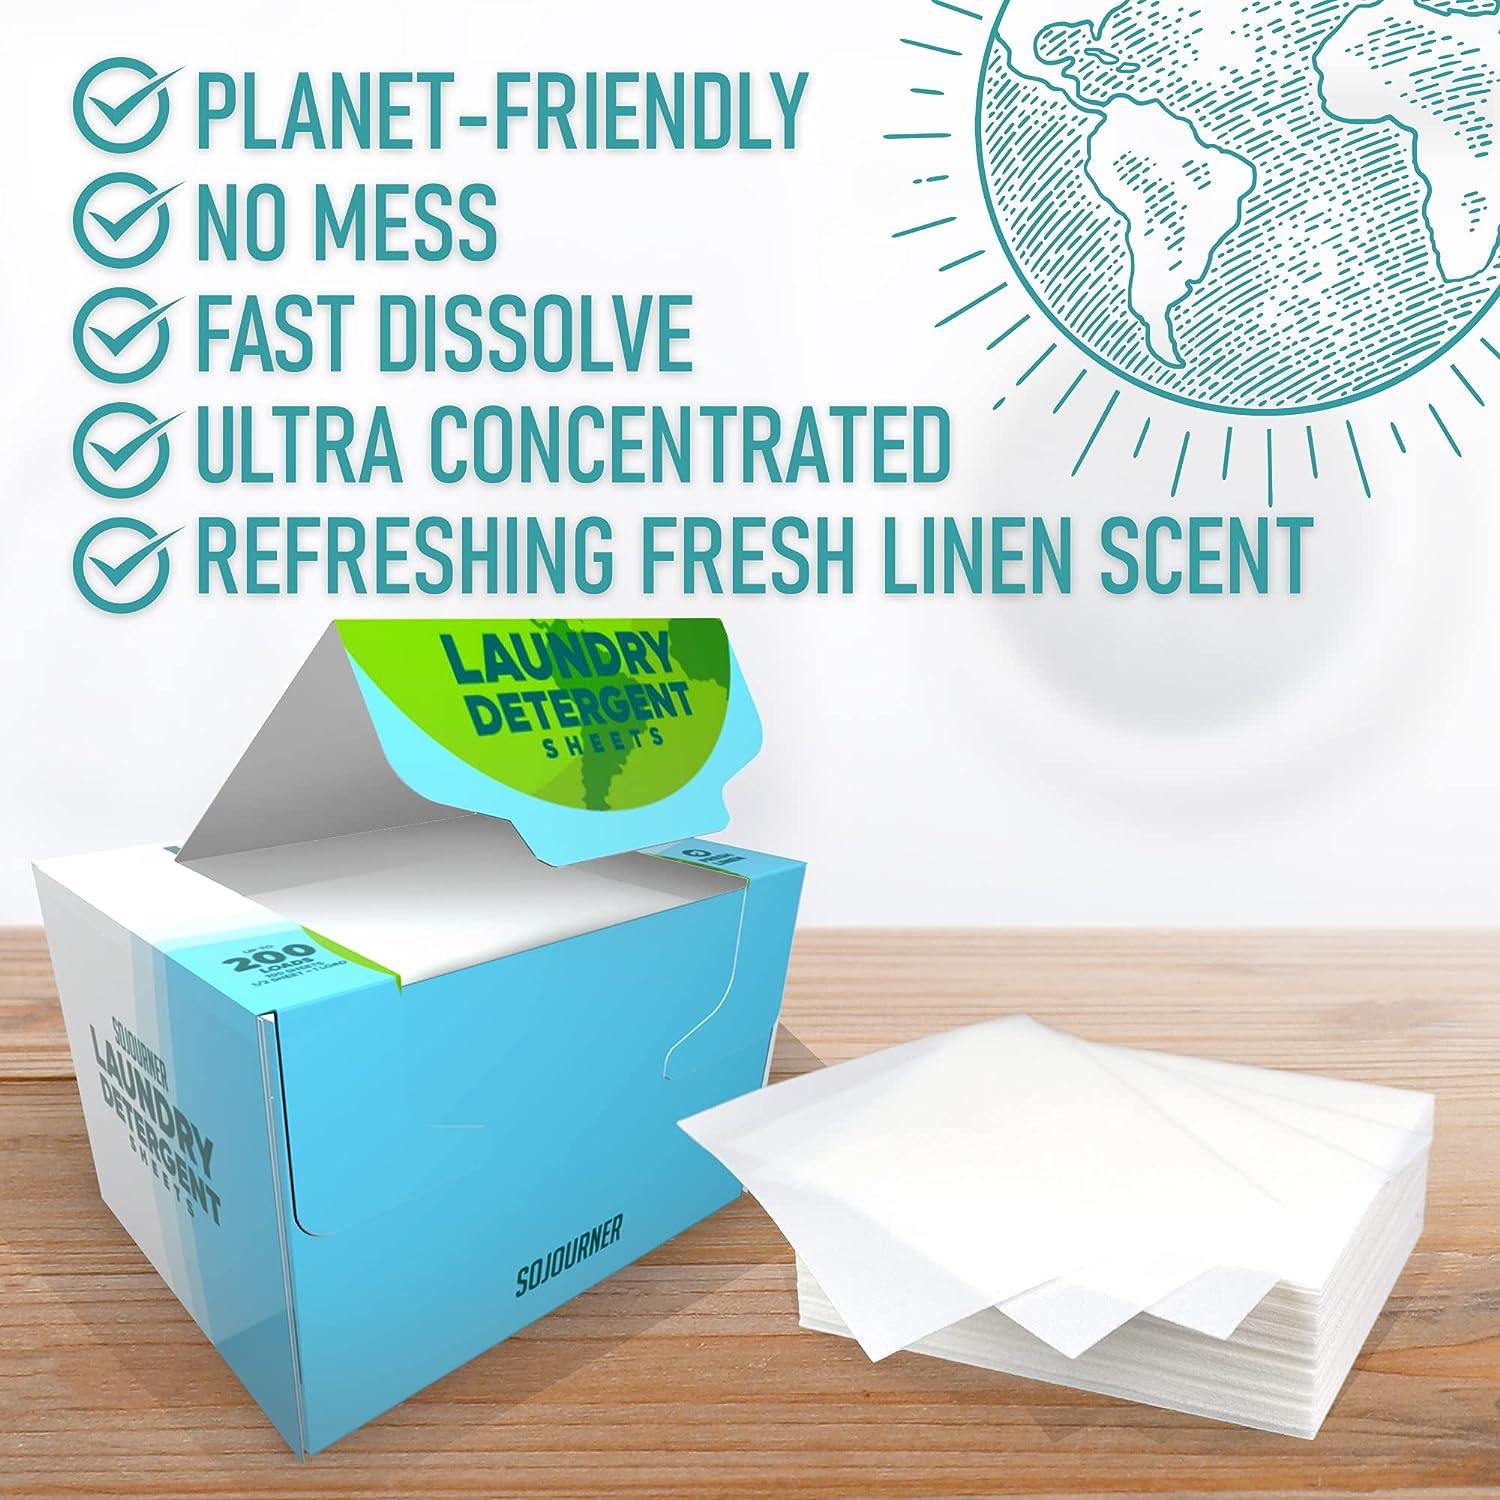 Eco Friendly Laundry Detergent Sheets (100 Sheets 200 Loads) Laundry Sheets  .